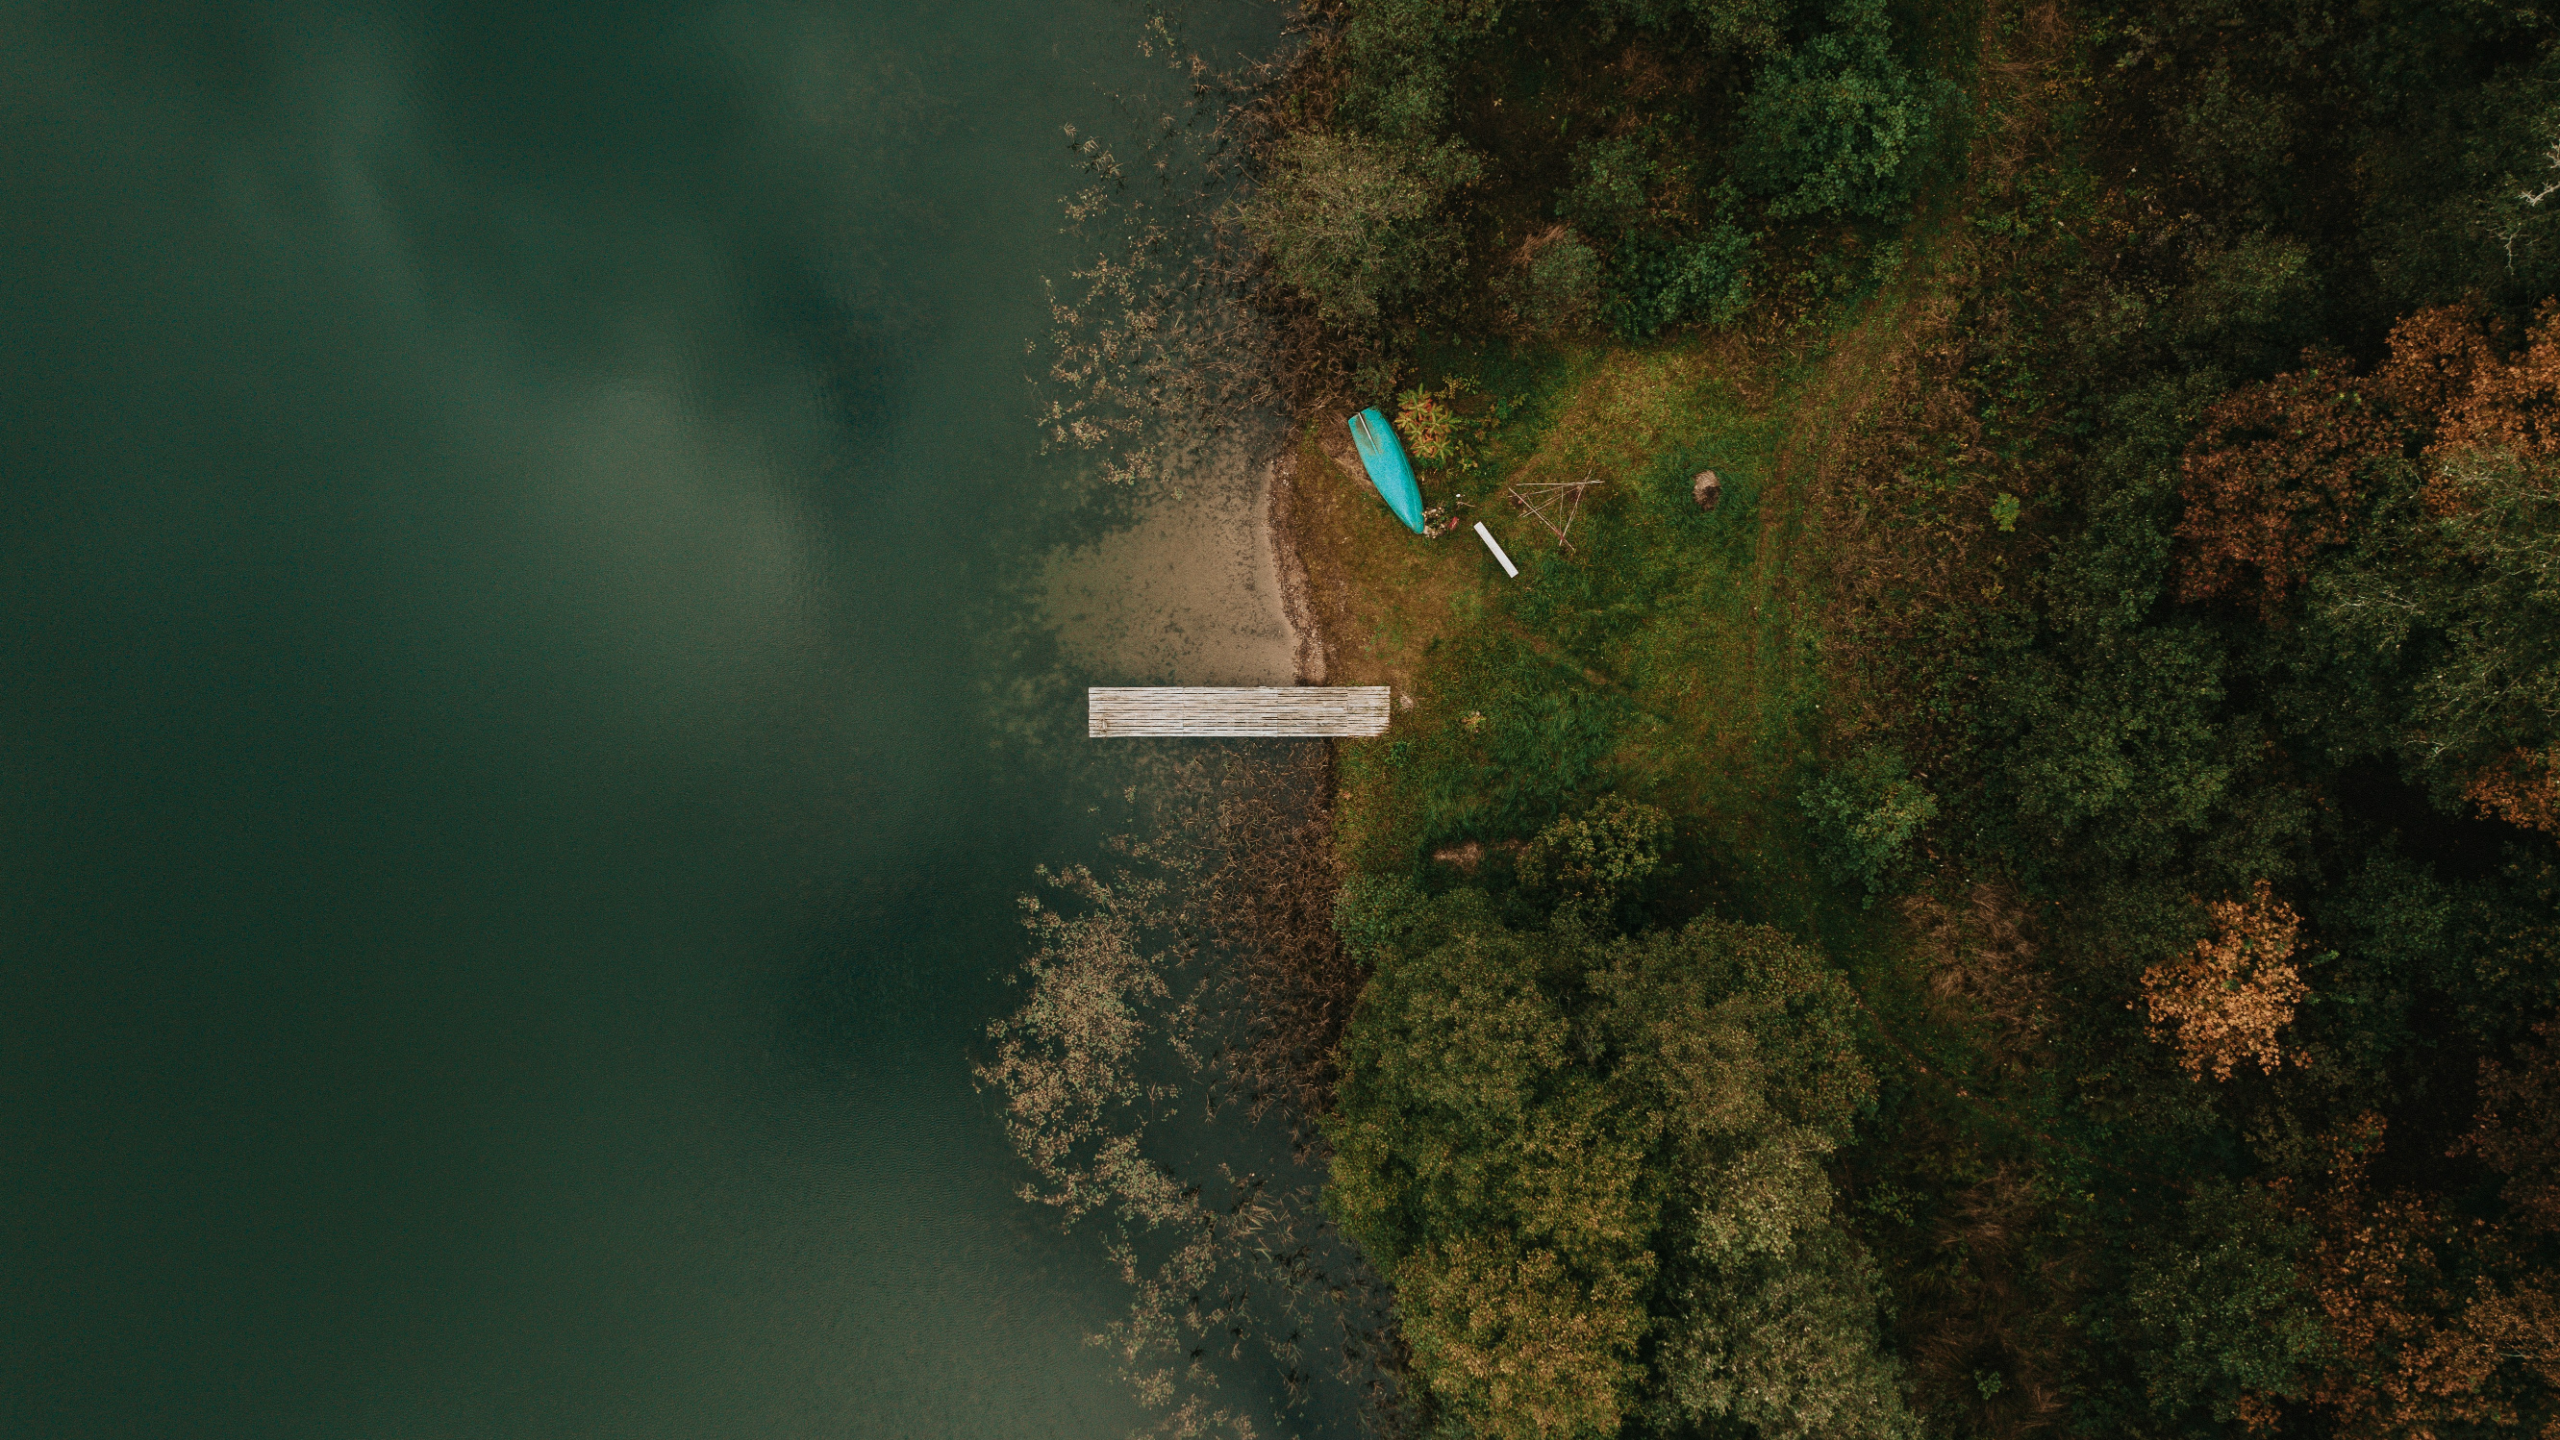 General 2560x1440 nature water boat plants trees green rainforest sea drone photo aerial view Latvia